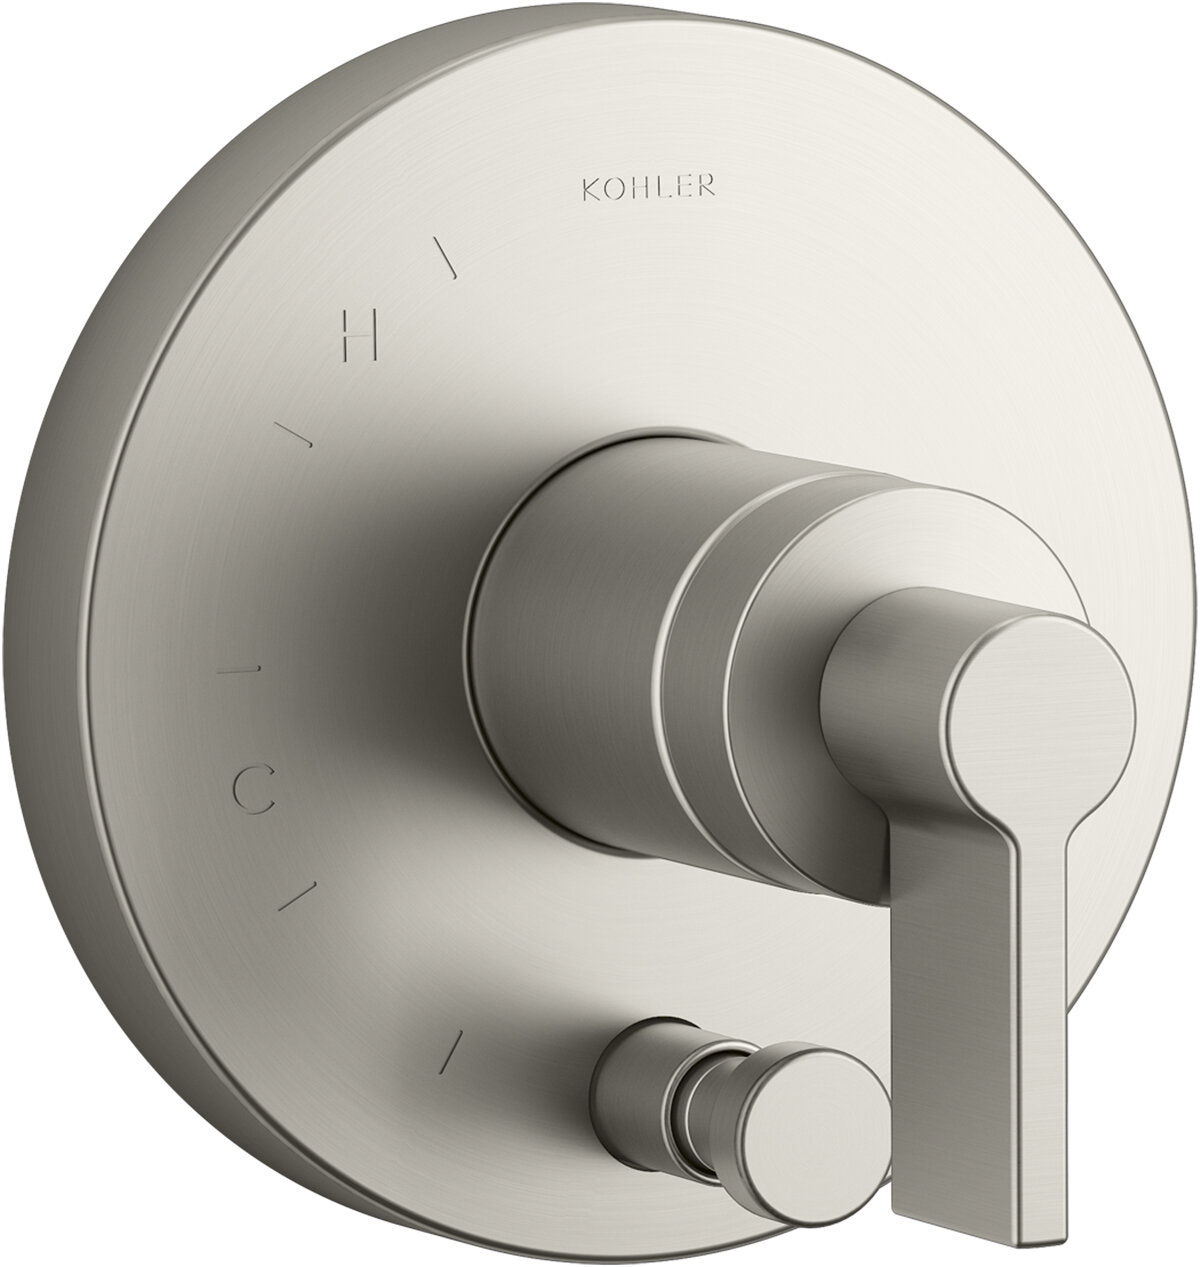 Components Rite-Temp Shower Valve Trim With Diverter And Lever Handle,  Valve Not Included